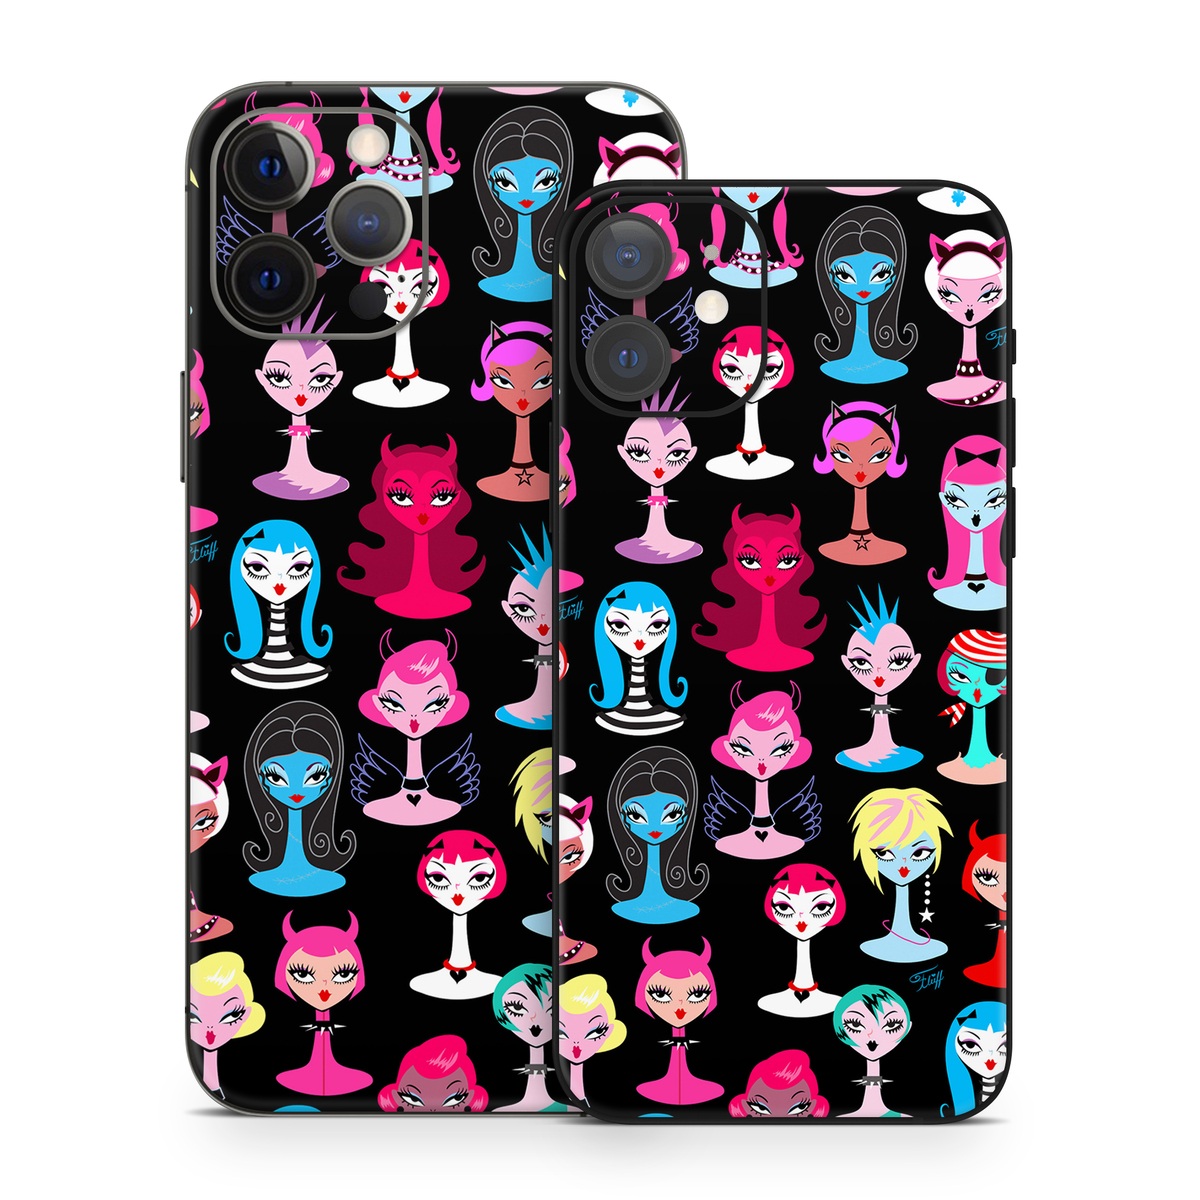 iPhone 12 Series Skin design of Facial expression, Product, Font, Pink, Red, Magenta, Material property, Pattern, Fictional character, Illustration, with black, pink, blue, brown, red, green, white, yellow colors